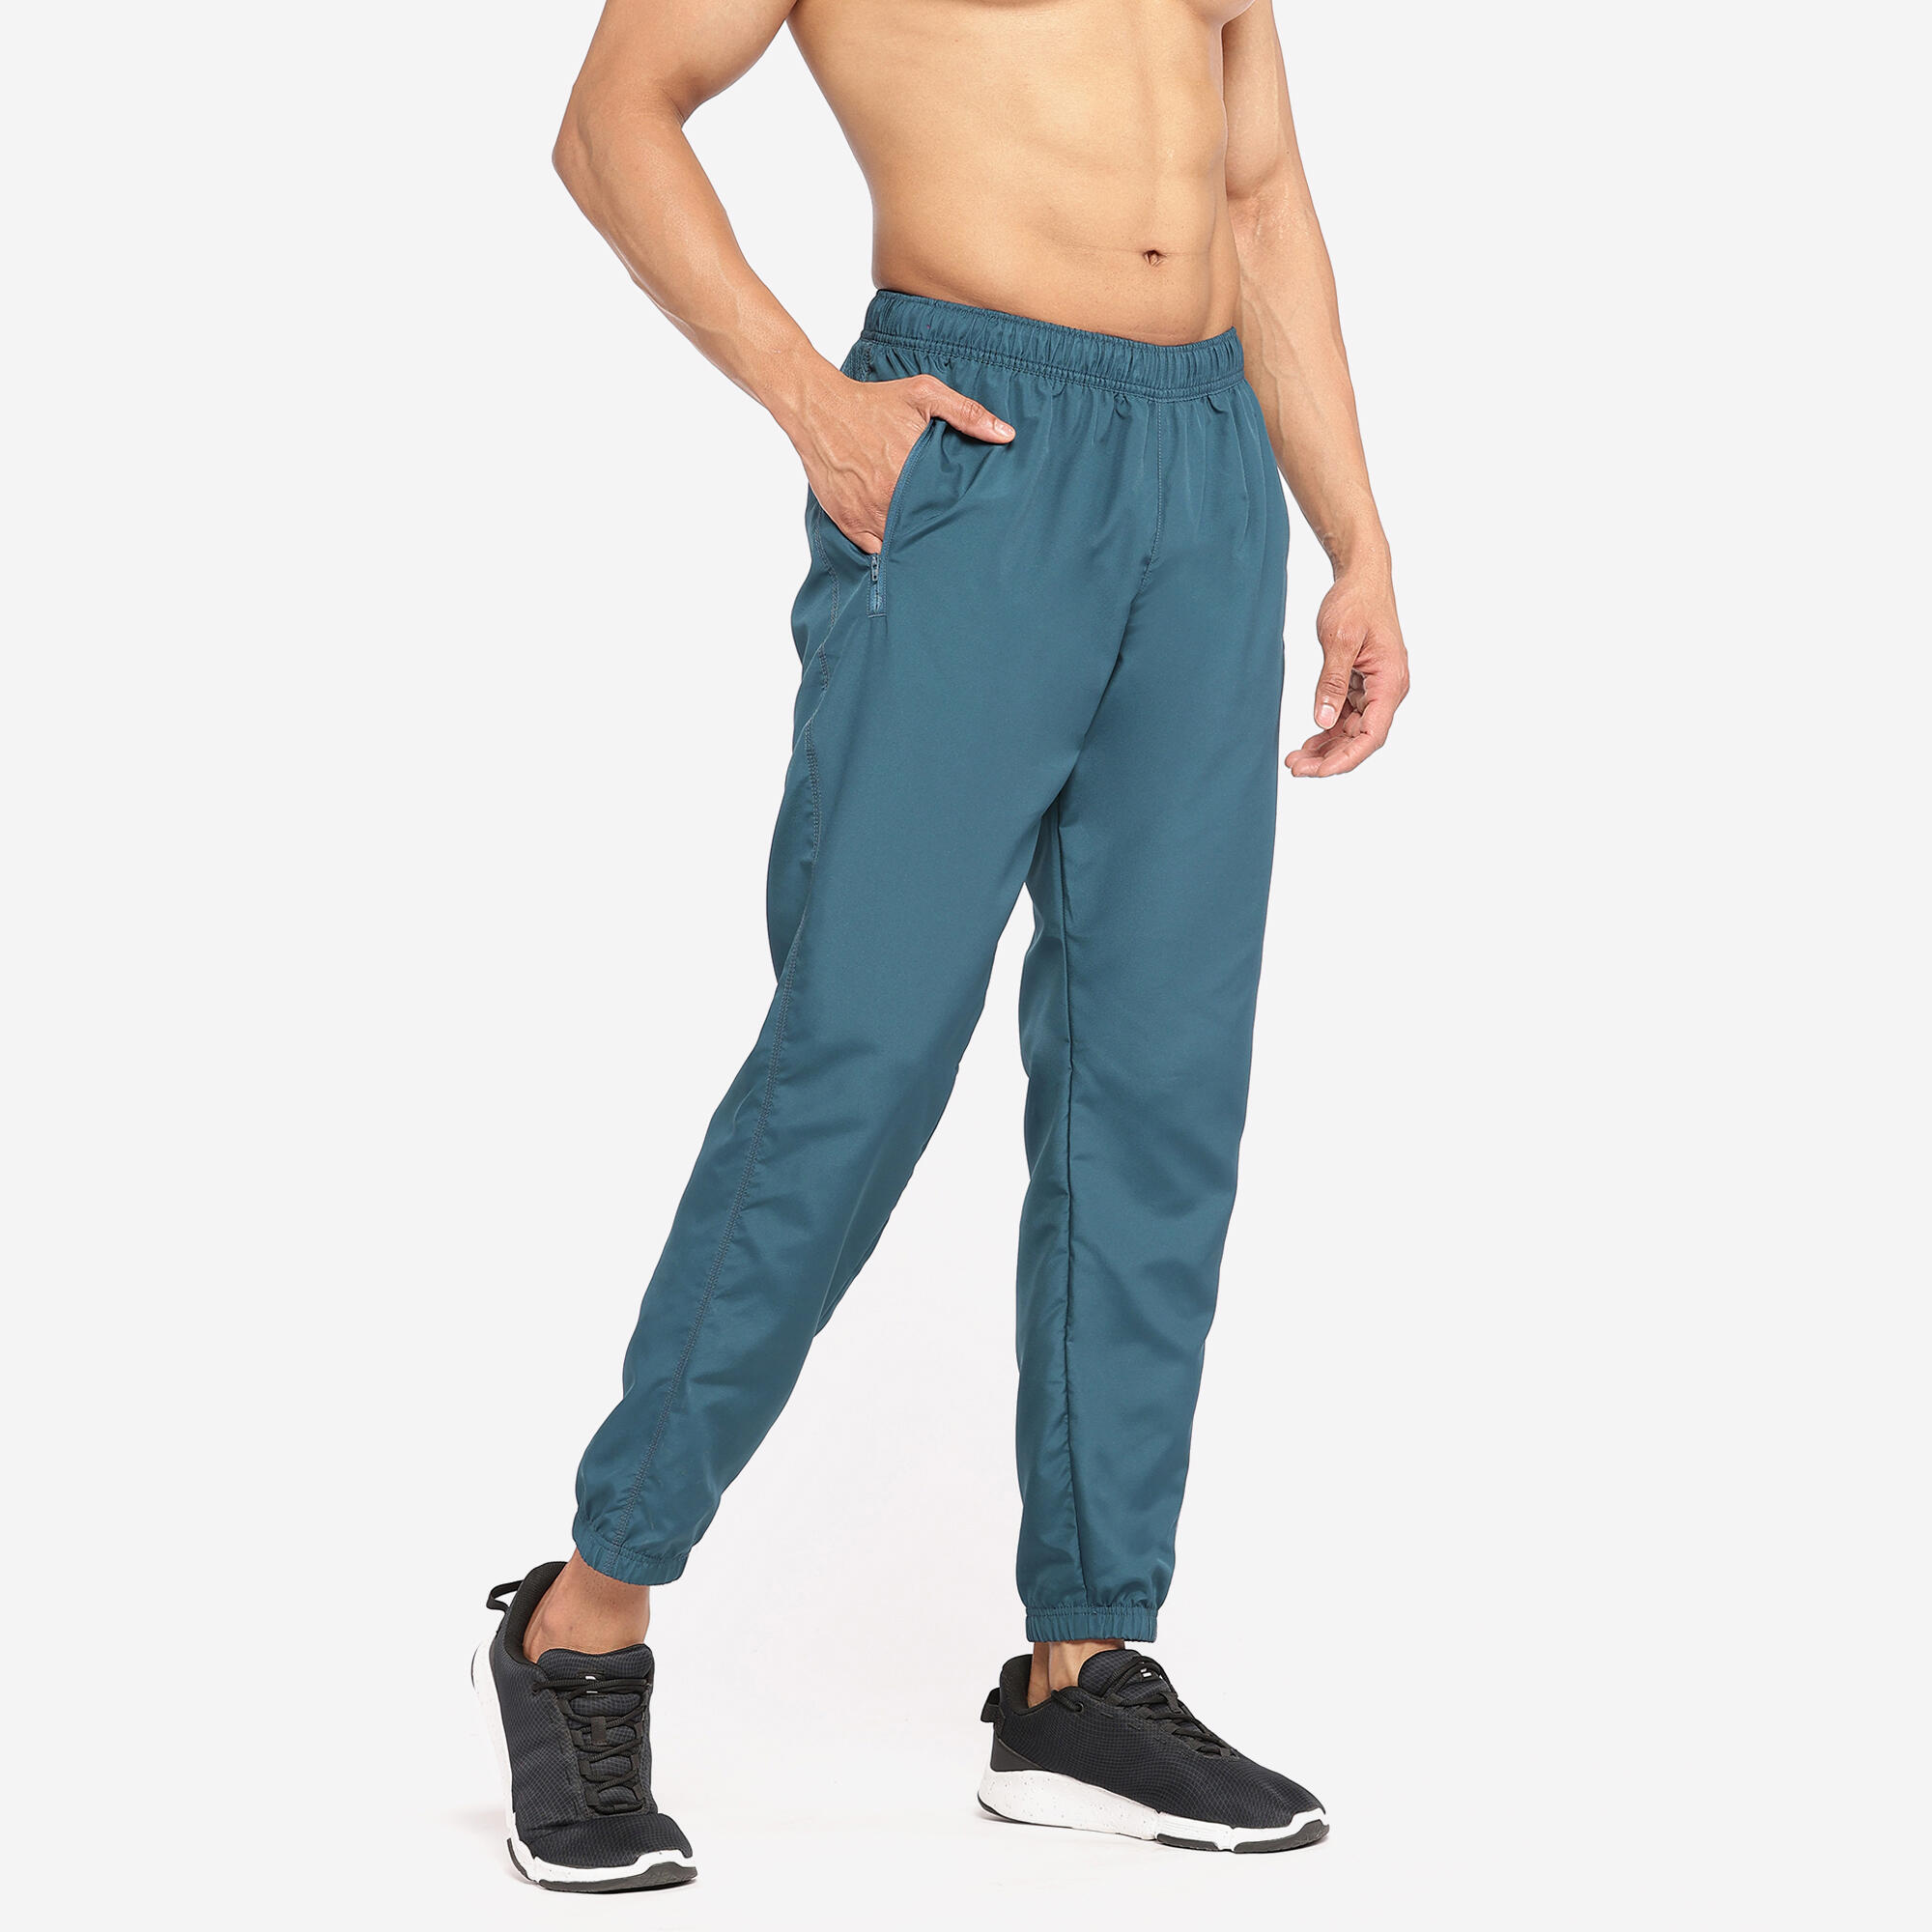 Buy Best Price Sports Trousers Get Comfortable Sports Trousers